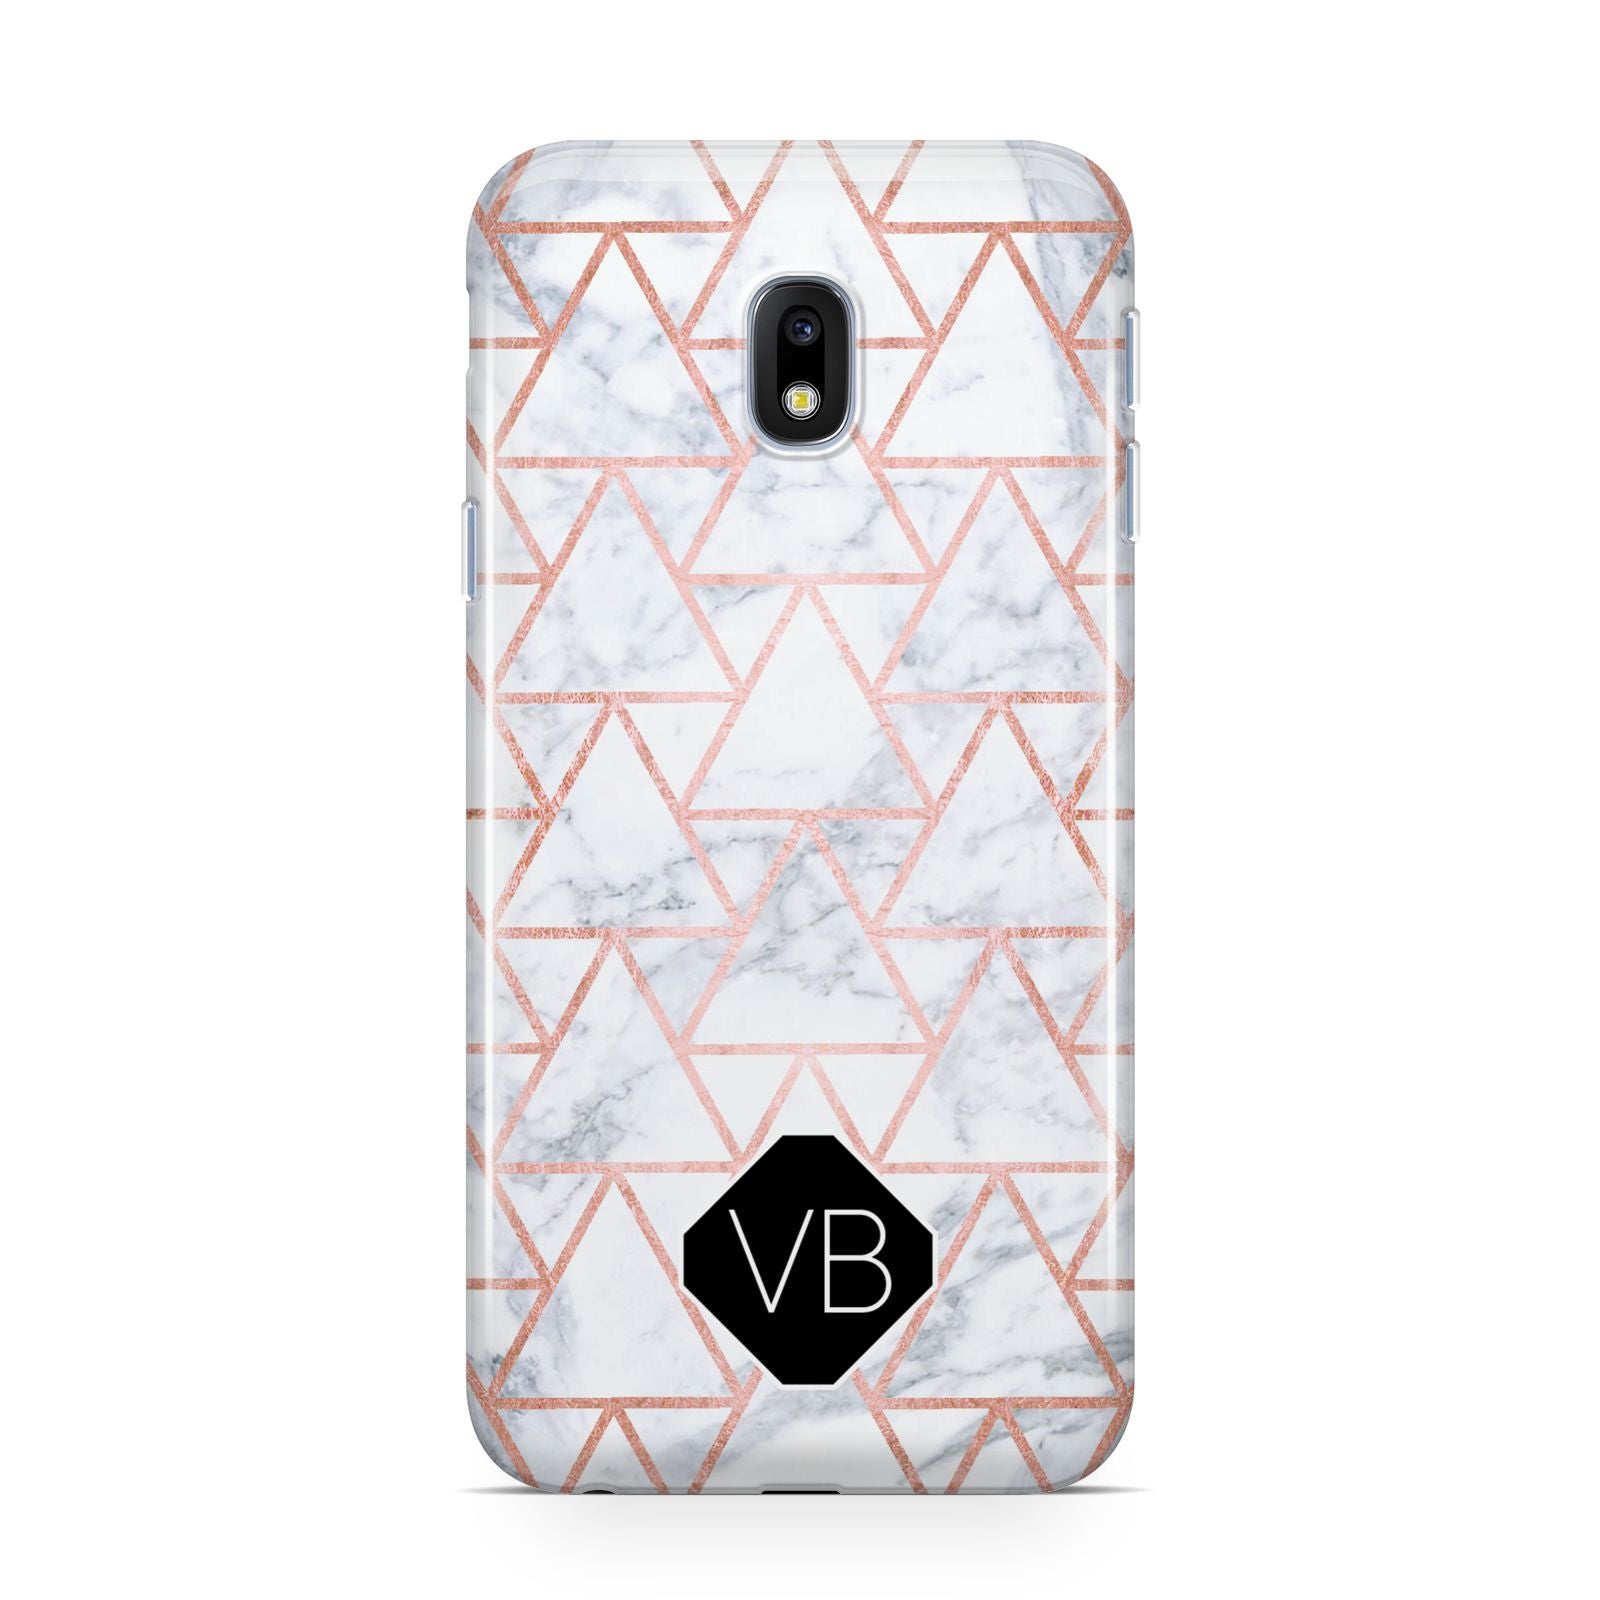 Personalised Rose Gold Grey Marble Hexagon Samsung Galaxy J3 2017 Case